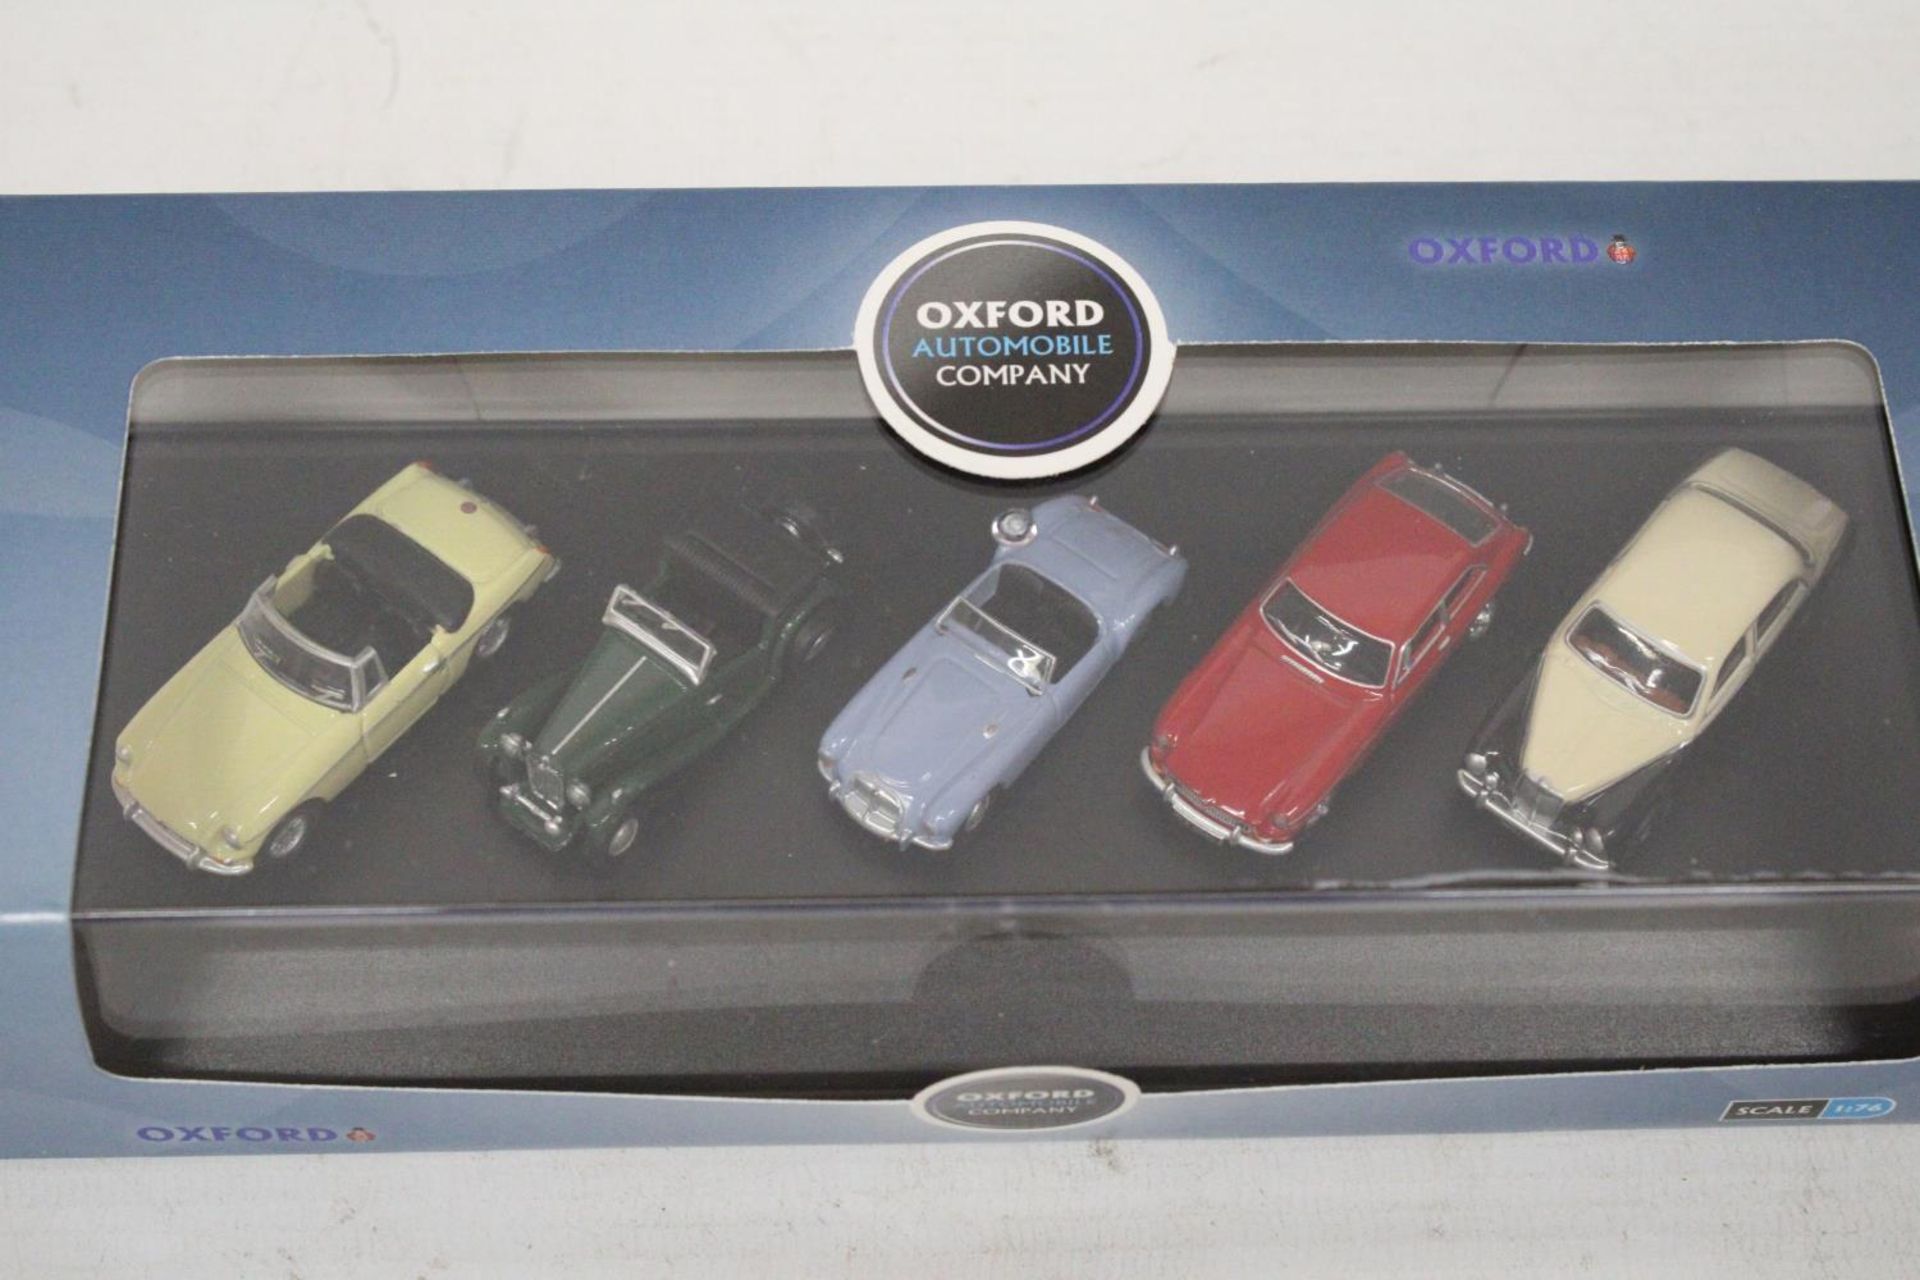 TWO OXFORD AS NEW AND BOXED AUTOMOBILE COMPANY SETS TO INCLUDE A FIVE PIECE MG SET AND A THREE PIECE - Image 5 of 8